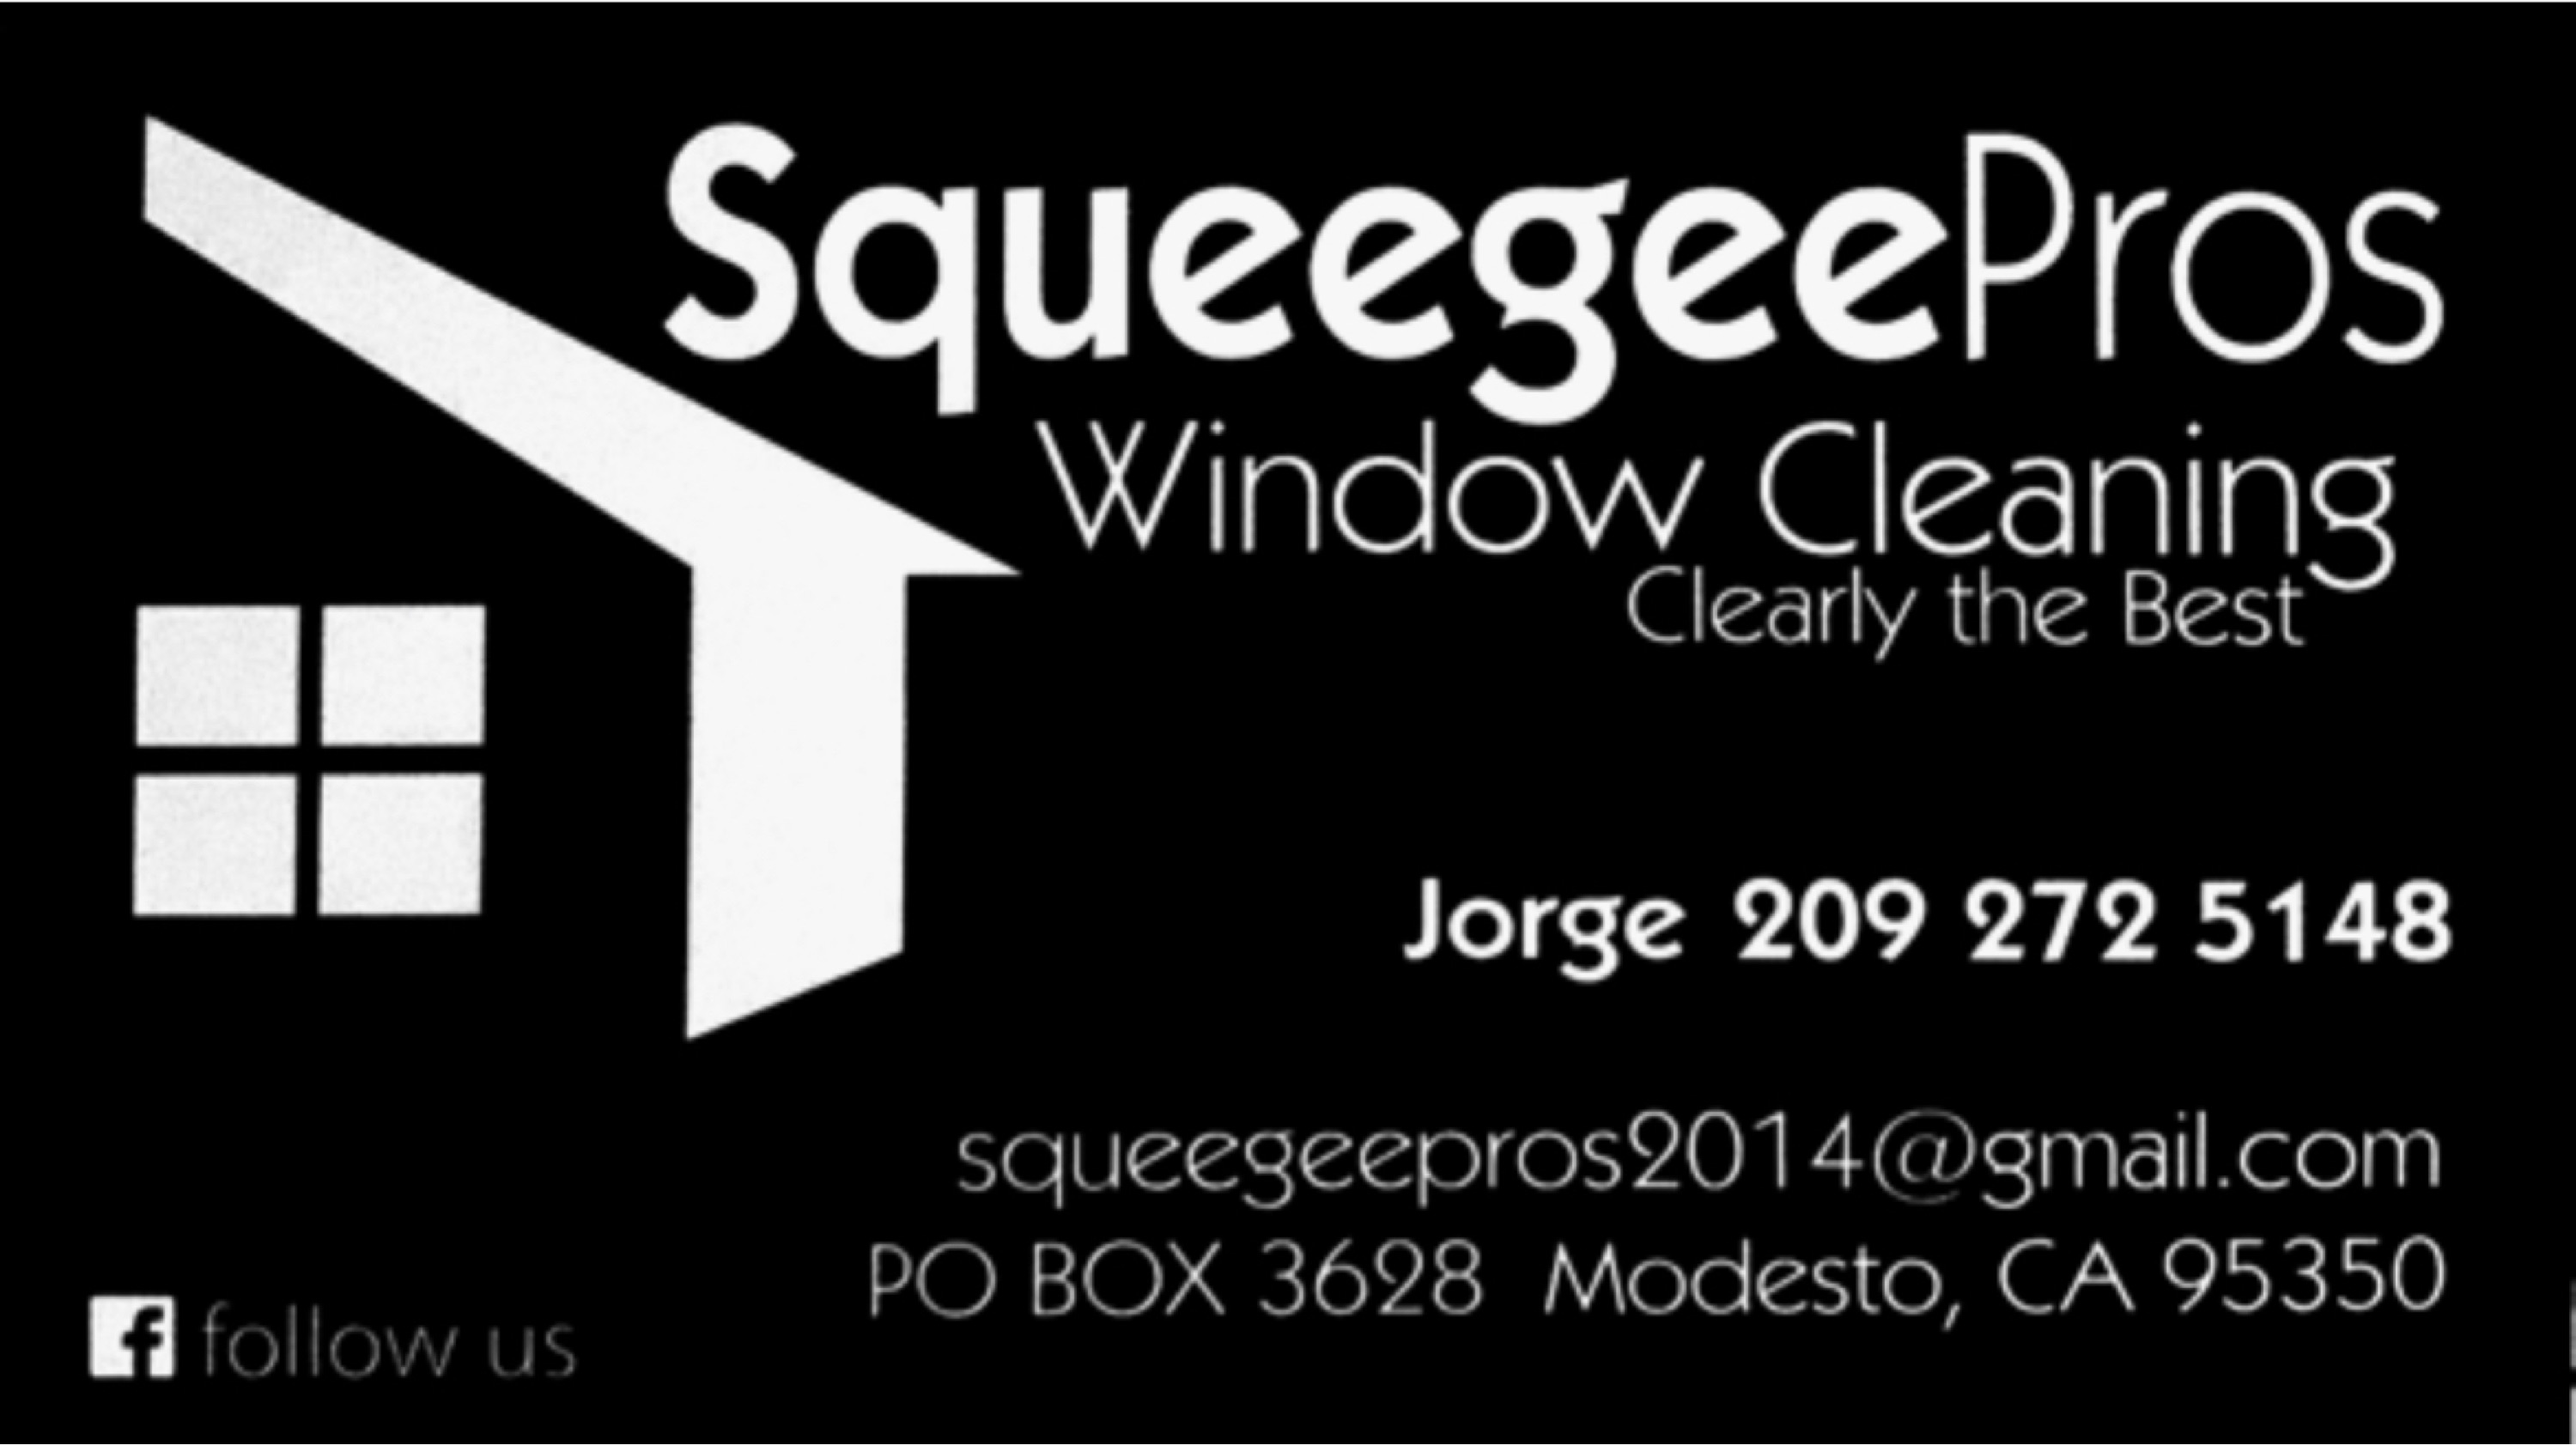 Squeegee Pros Window Cleaning Logo